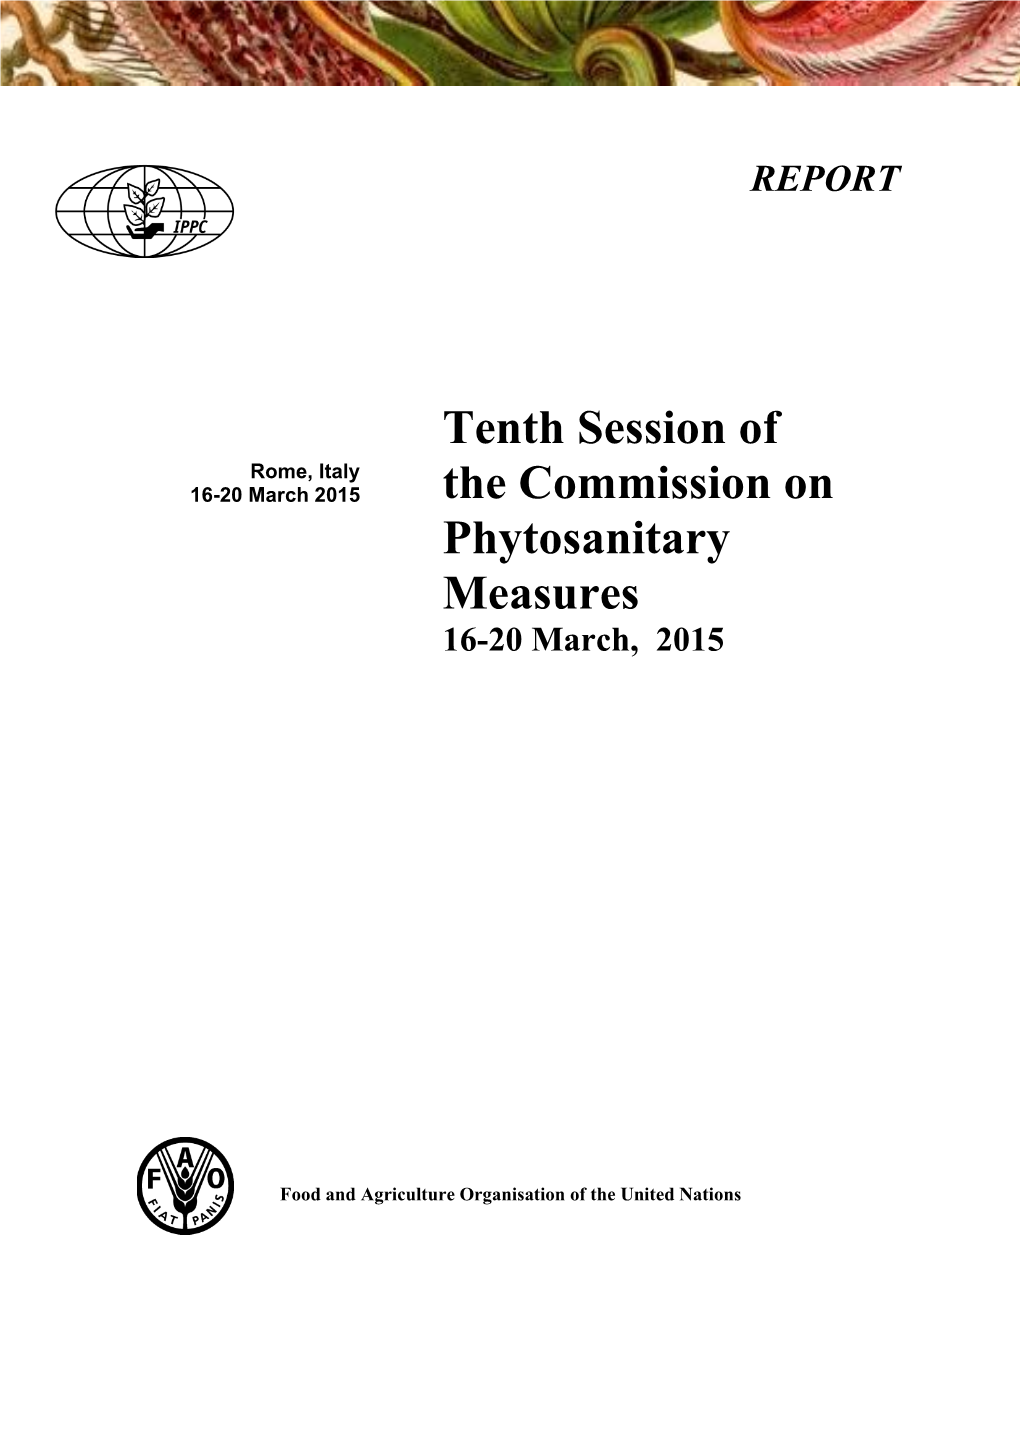 Tenth Session of the Commission on Phytosanitary Measures